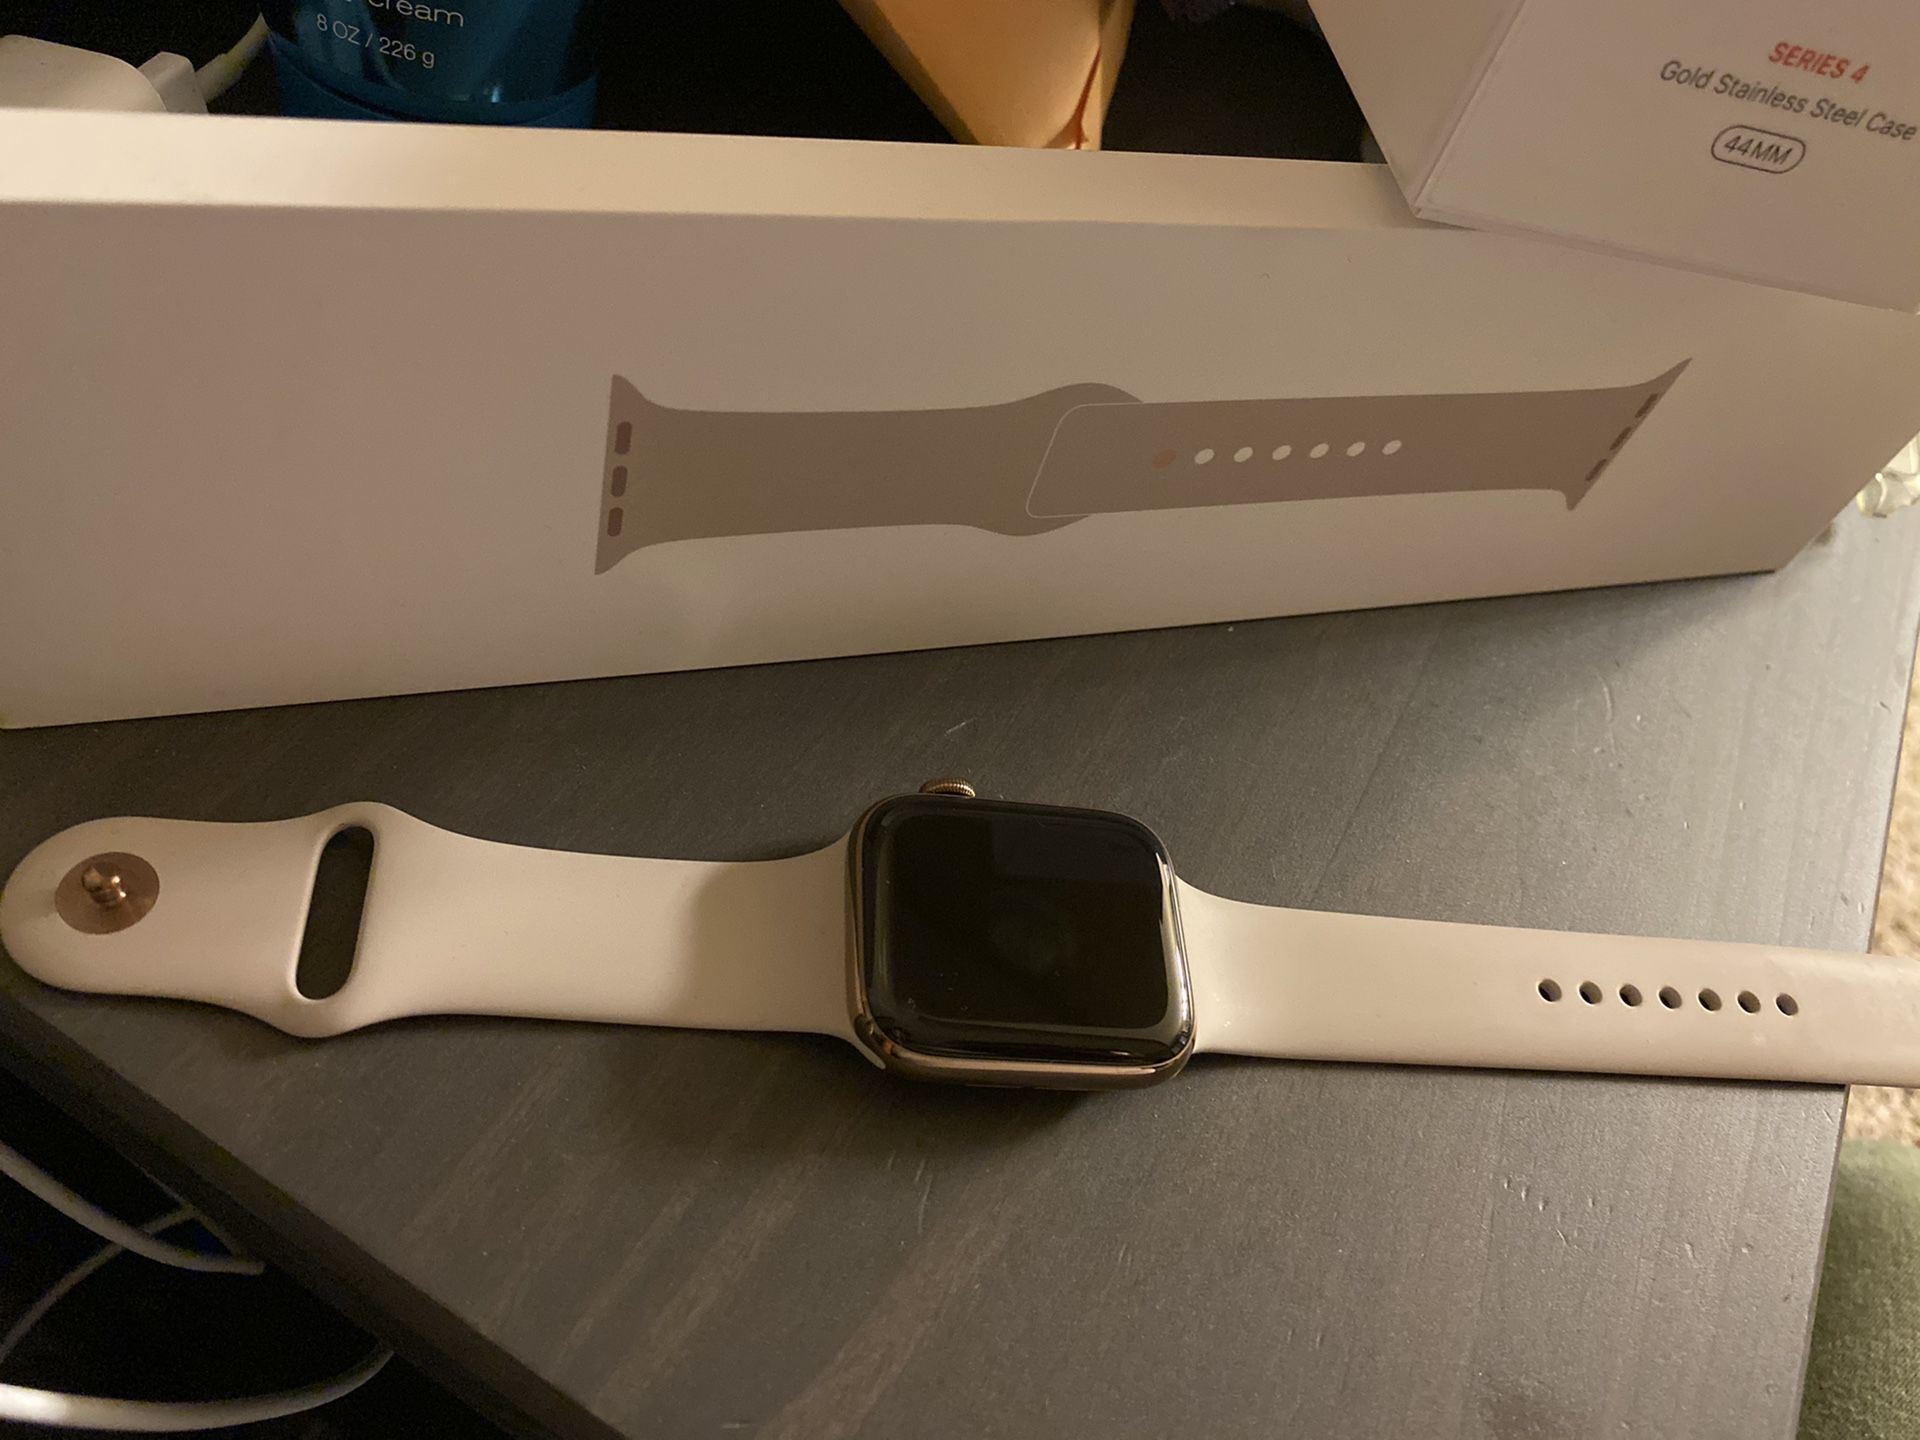 Apple Watch Series 4 Gold Stainless Steel 44mm